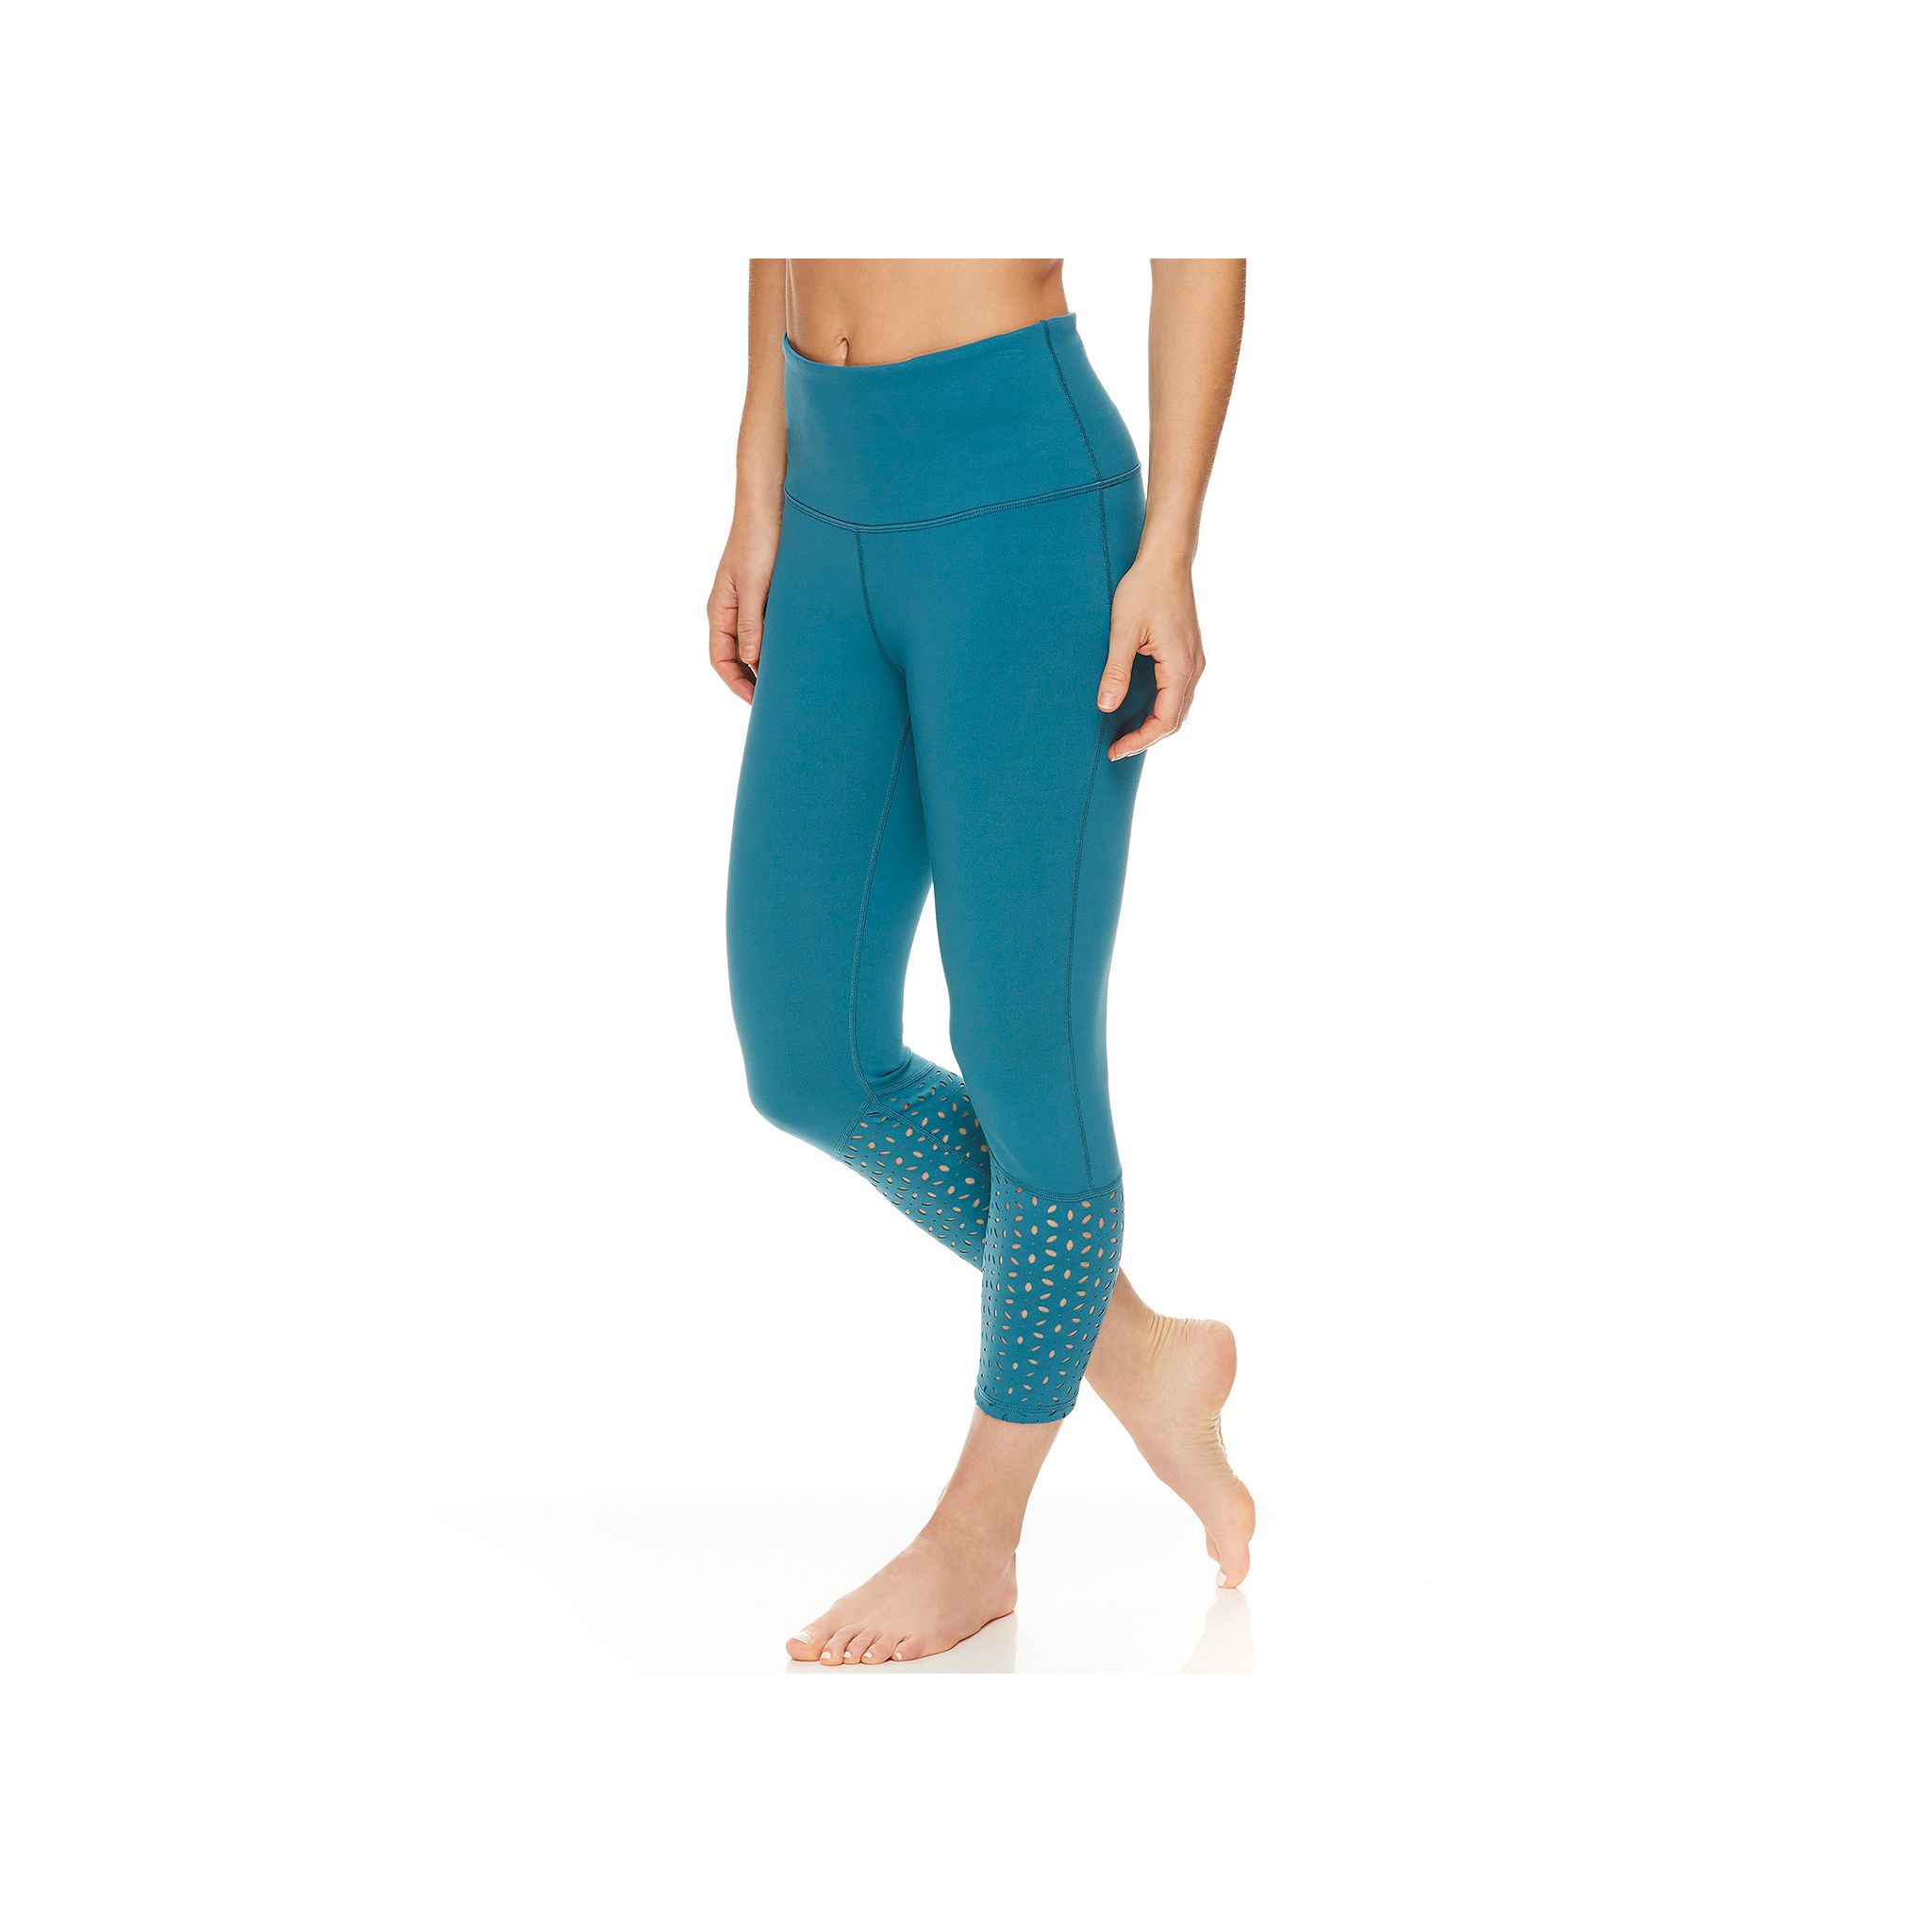 Women's Compression Leggings: Shop Active Bottoms for Your Wardrobe